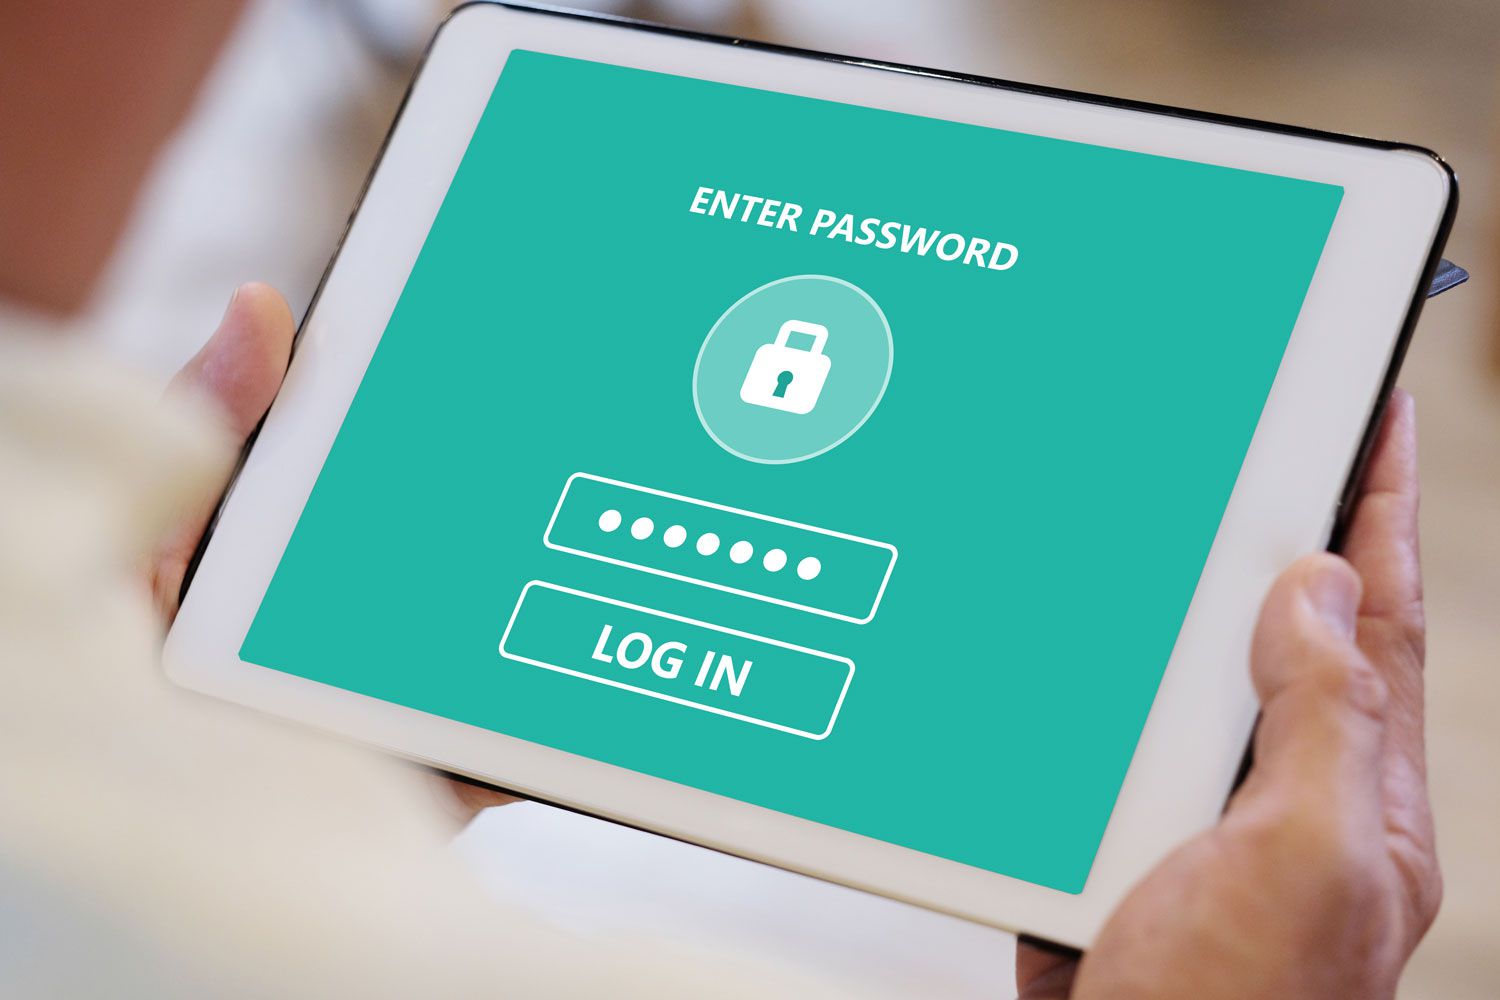 how-to-get-into-android-tablet-forgot-password